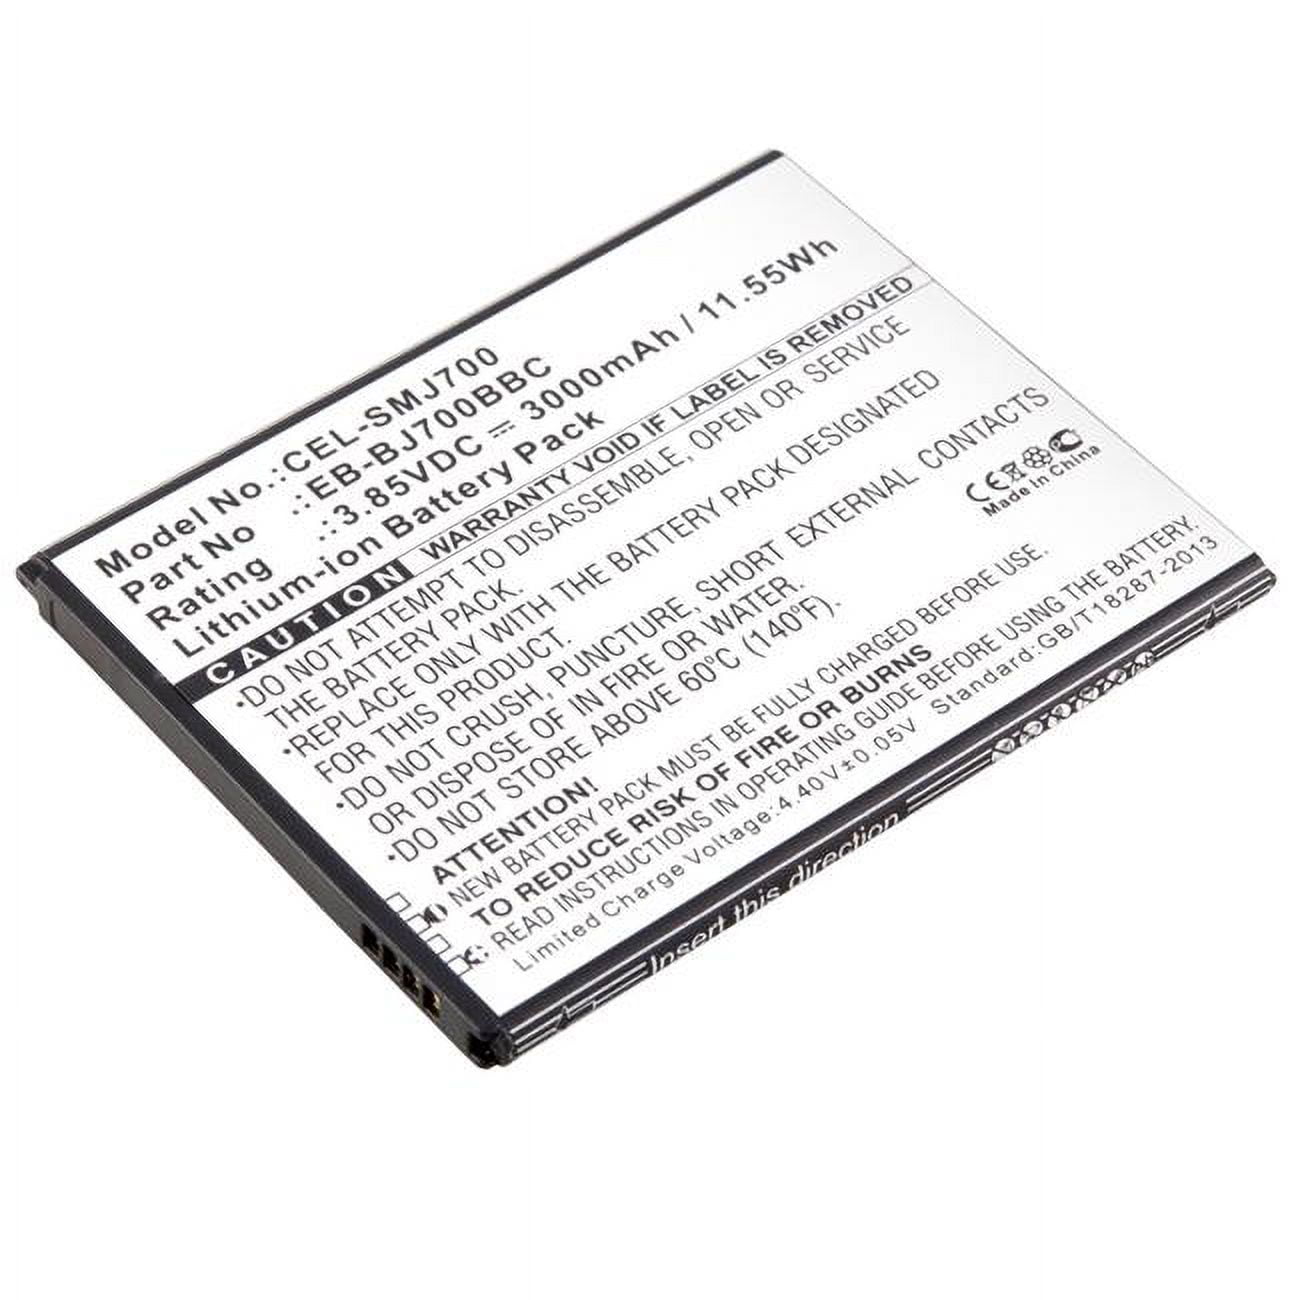 Picture of Ultralast CEL-SMJ700 3.8V & 3000 mAh Replacement Battery Rechargeable Li-ion Battery for Samsung - EB-BJ700BBC